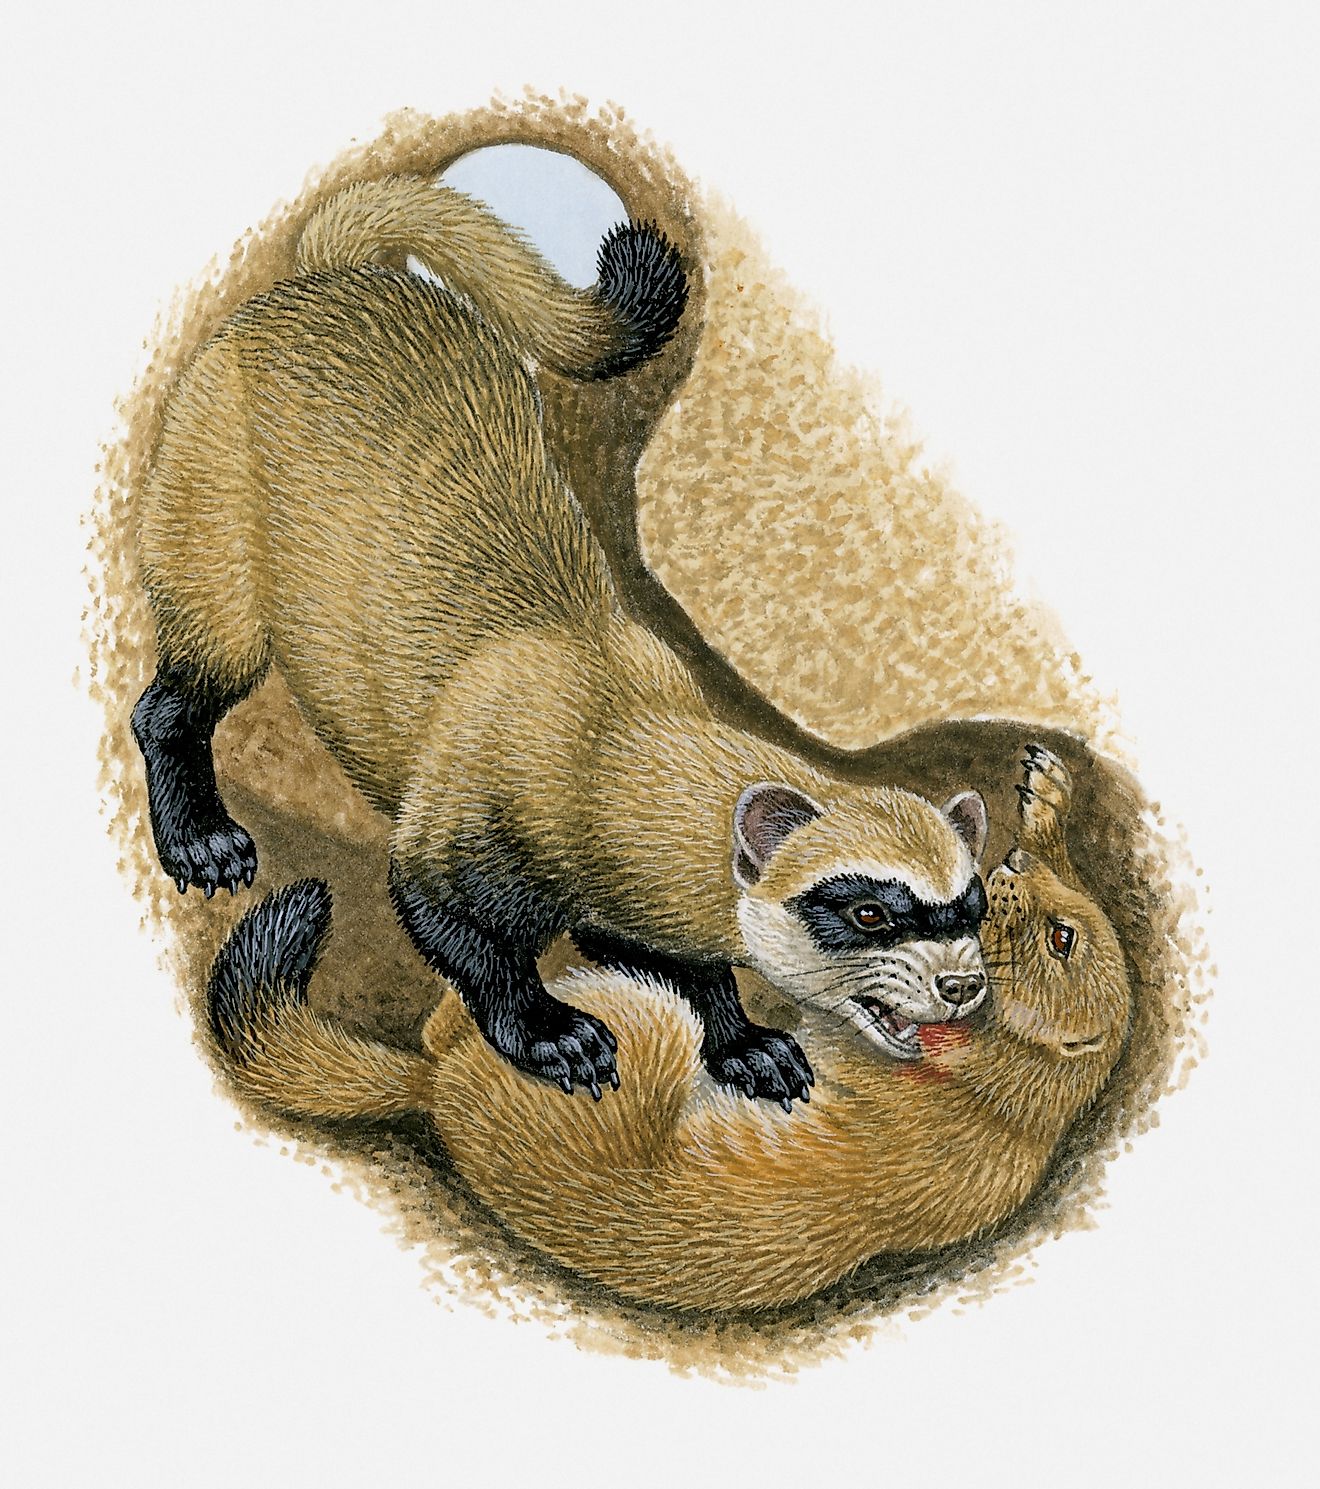 A depiction of a Black-Footed ferret killing a Prairie Dog within its own burrow.